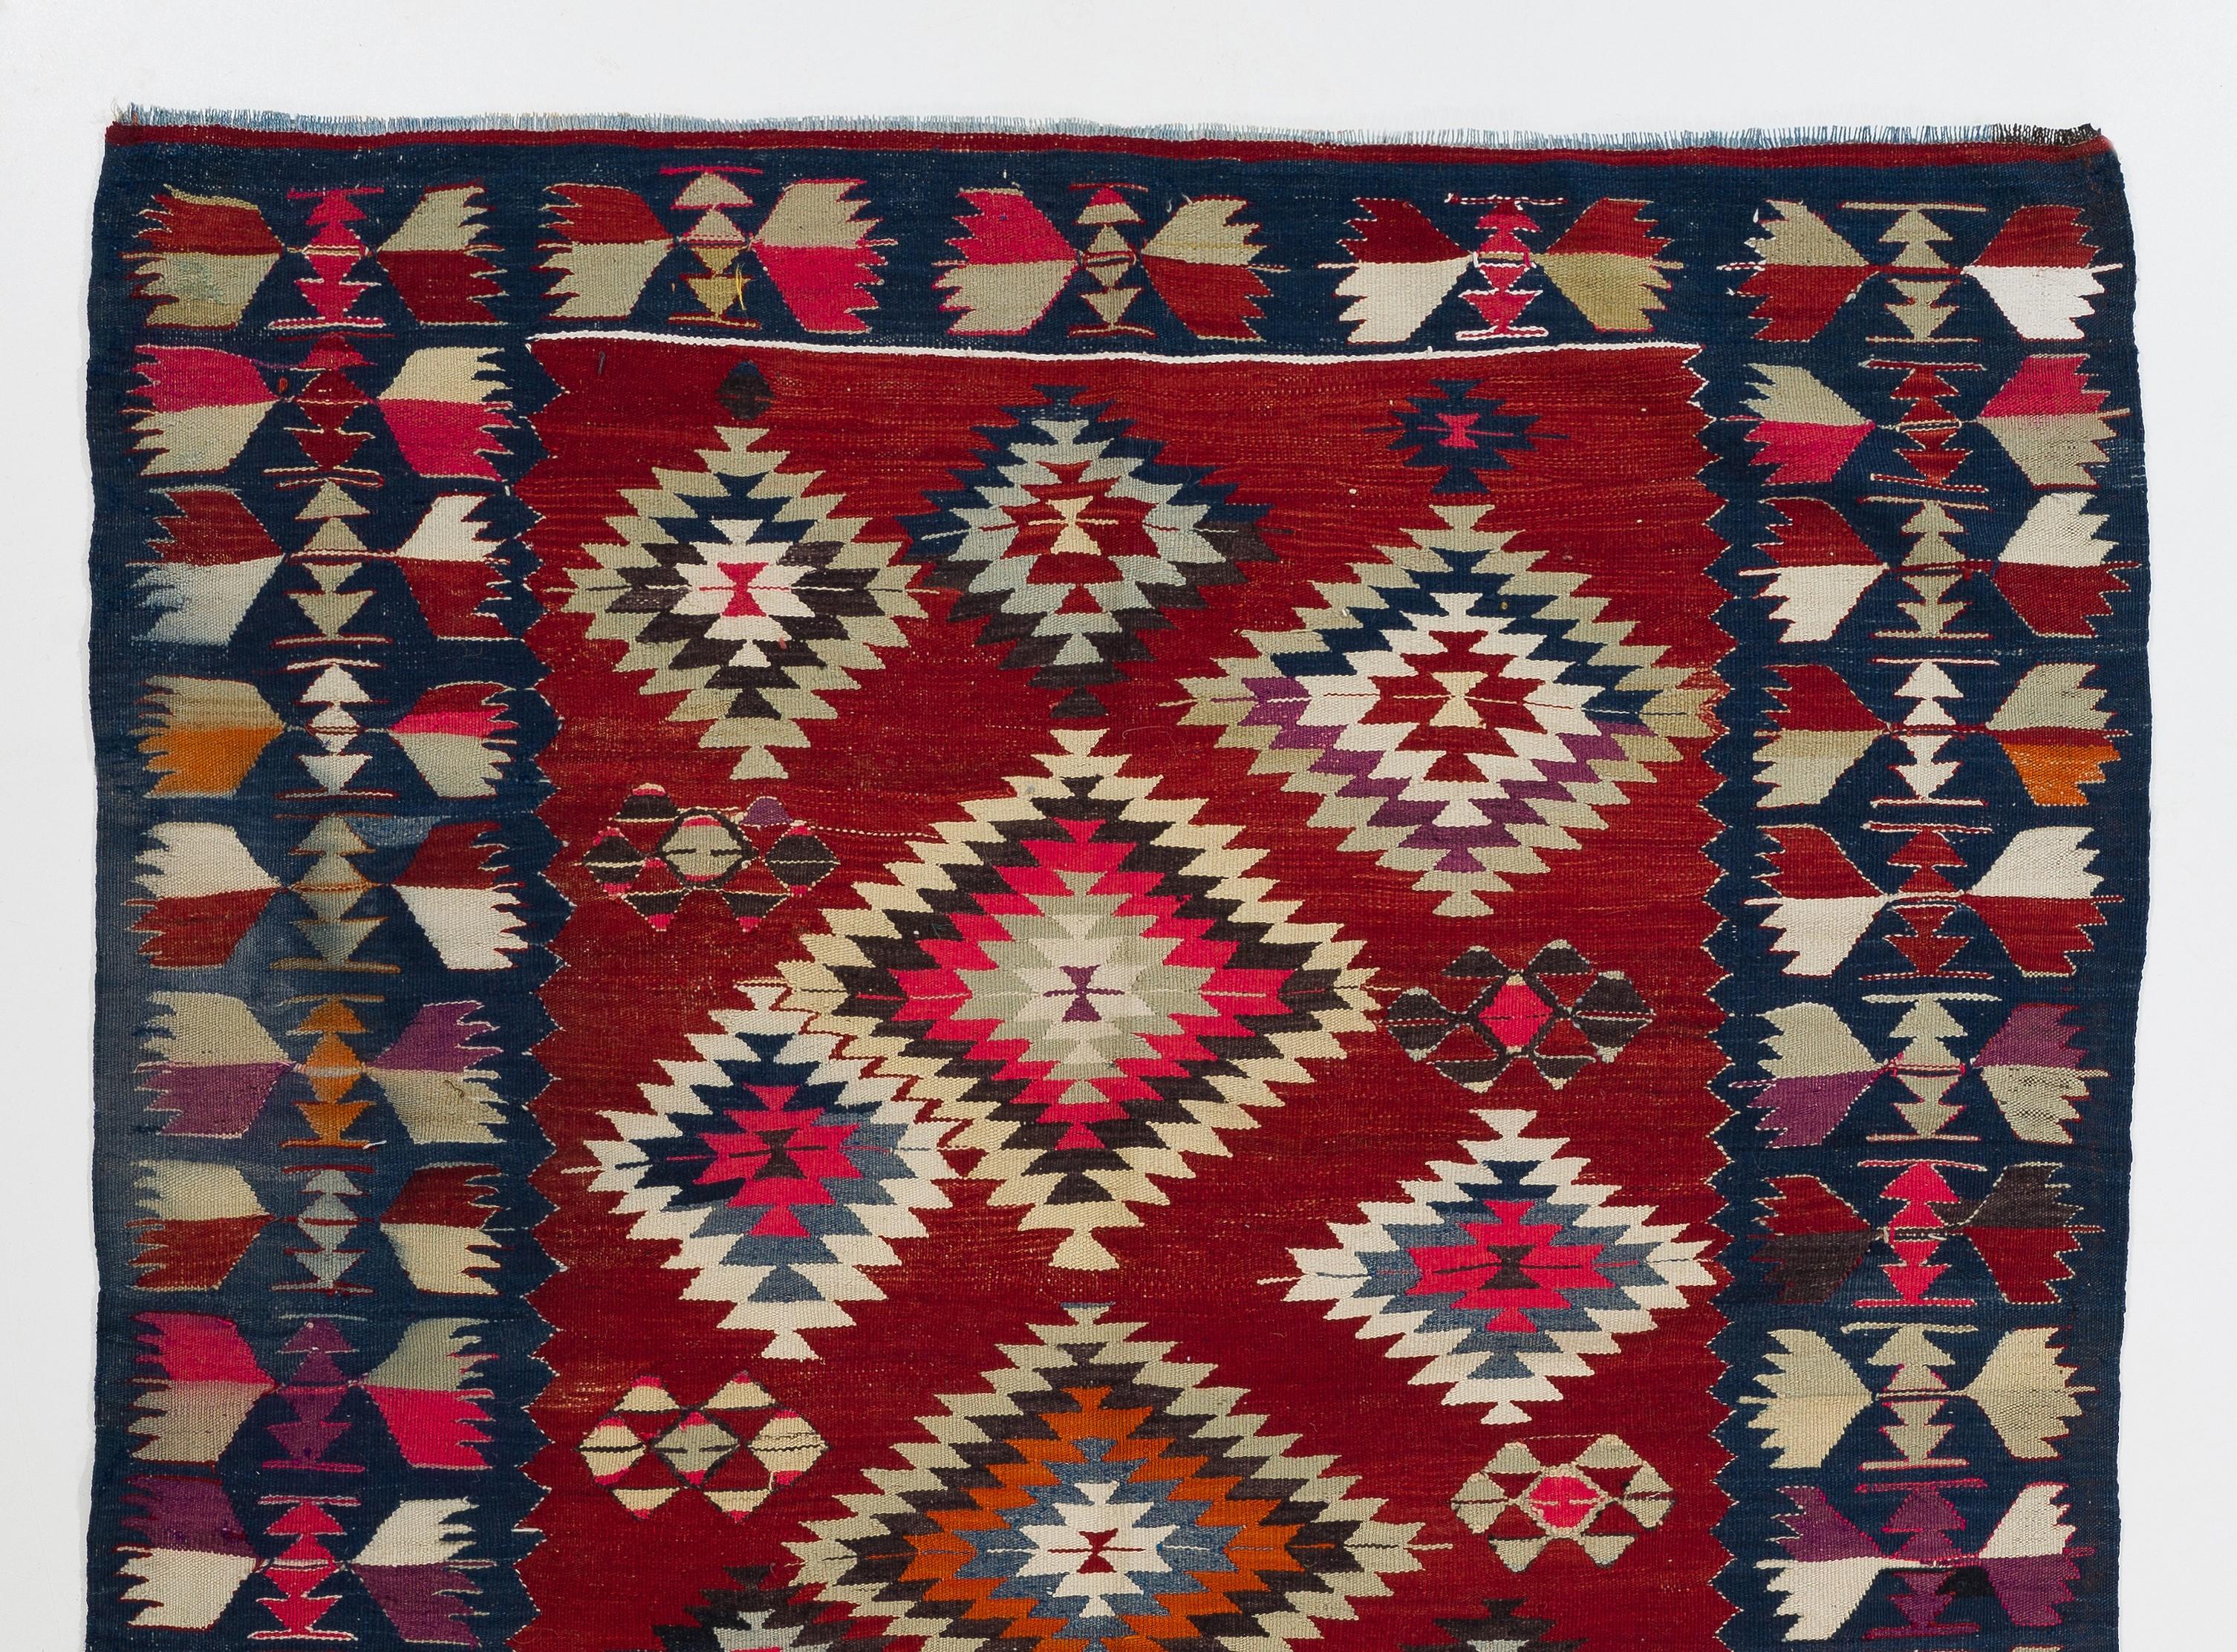 A colorful vintage Turkish Kilim. A flat-weave rug made of wool in excellent condition. 

This captivating Kilim features stepped diamond patterns nestled within each other, free-floating all-over the field in varying sizes and beautiful, rich,